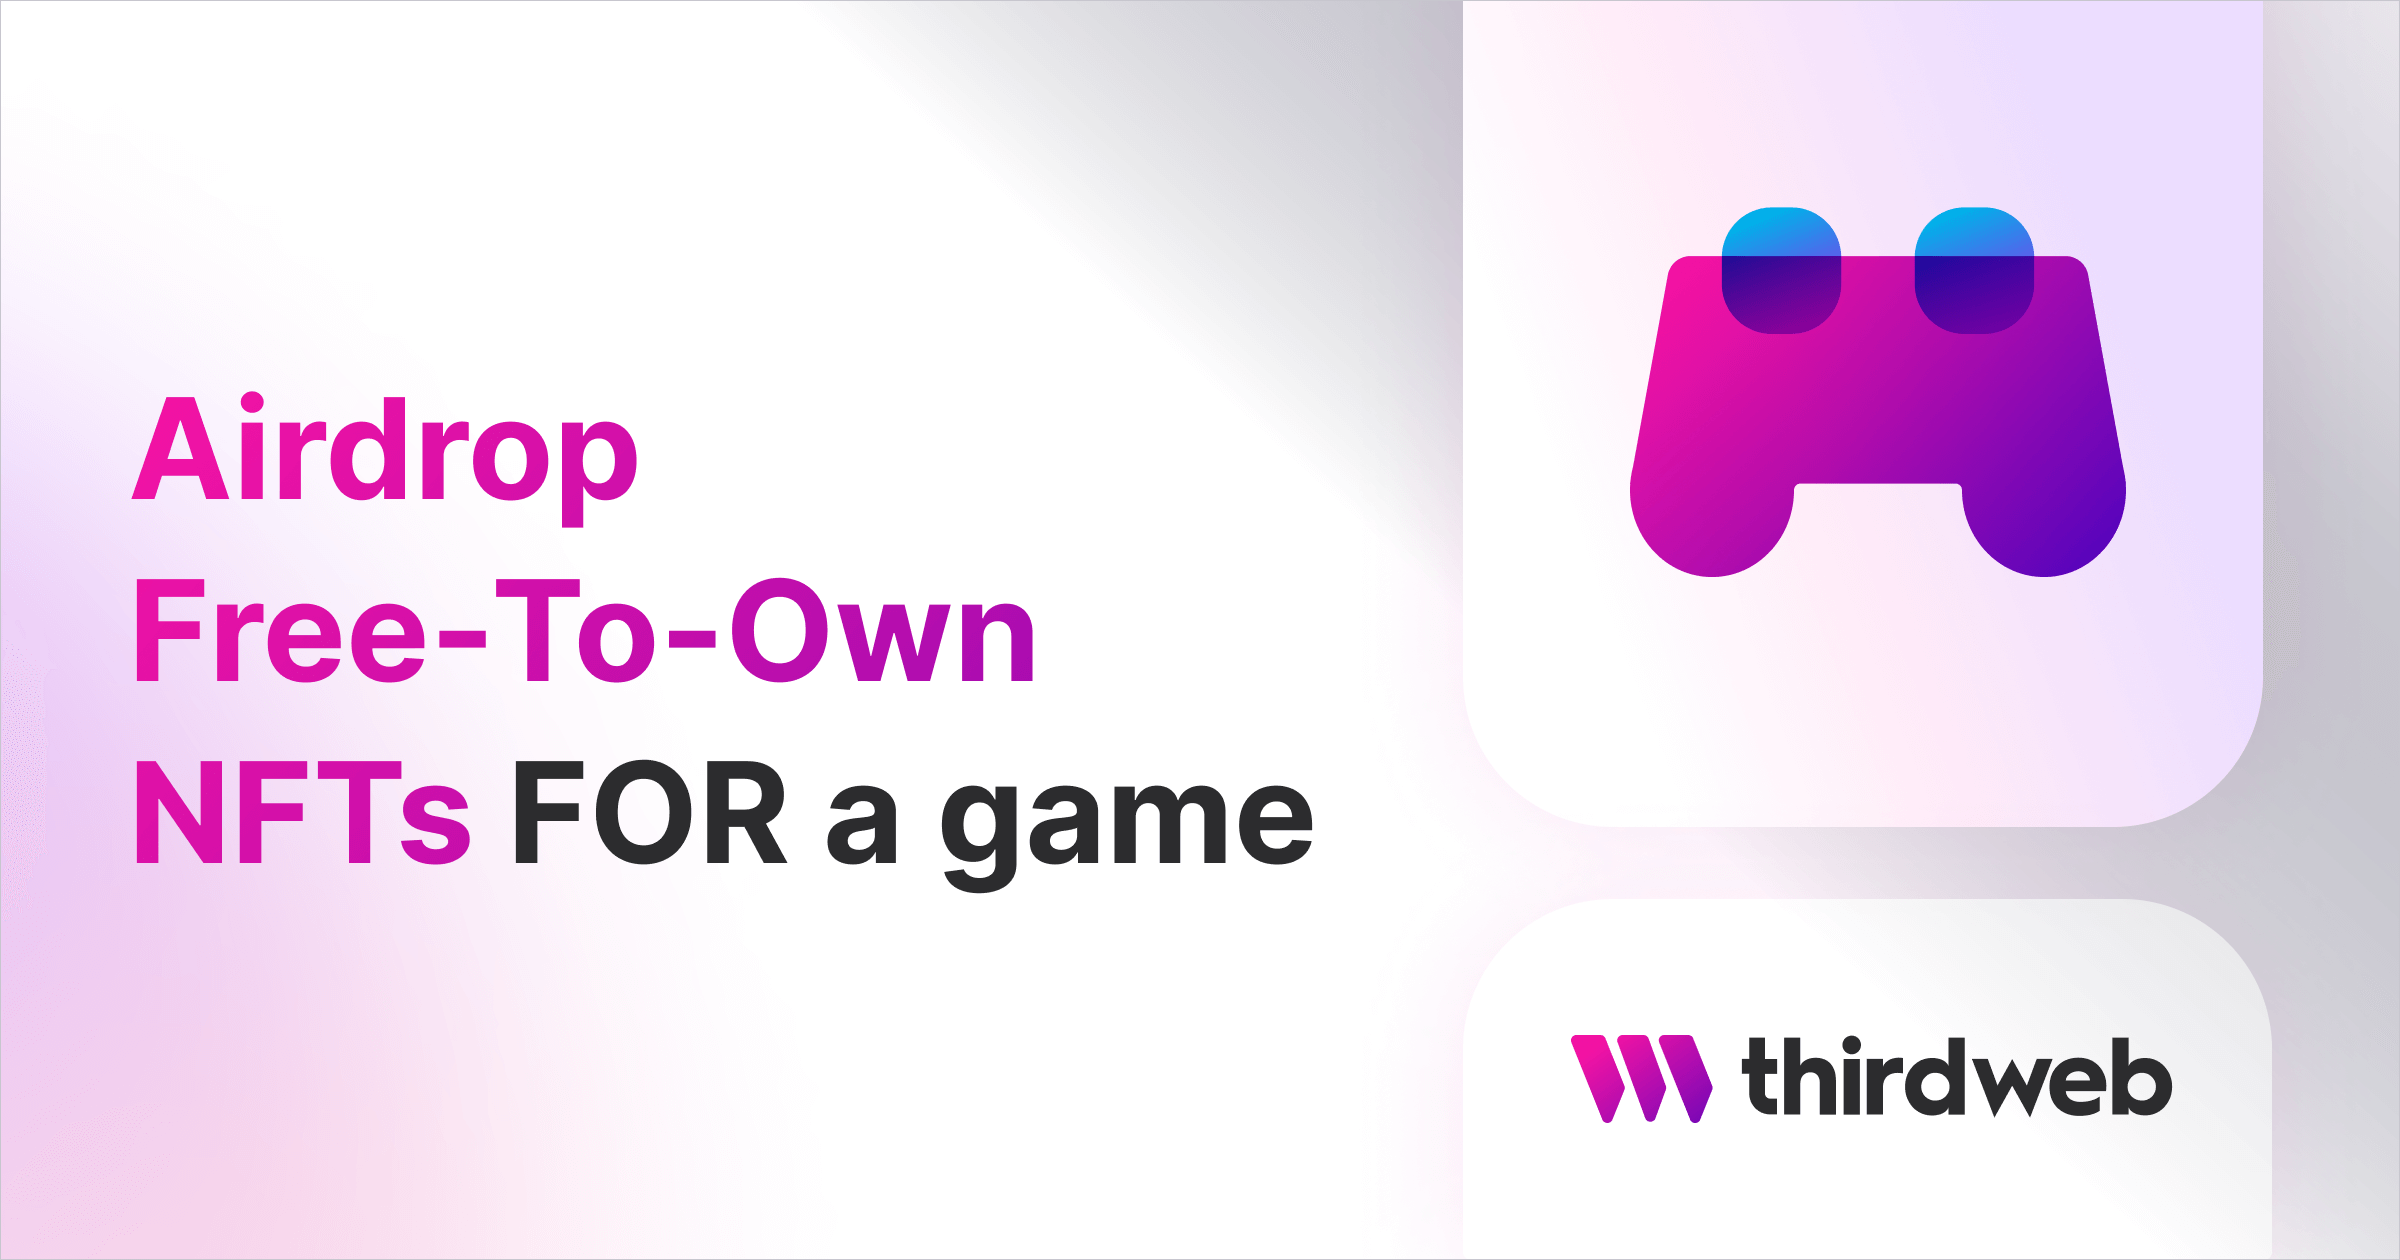 Airdrop Free-To-Own NFTs For Your Web3 Game